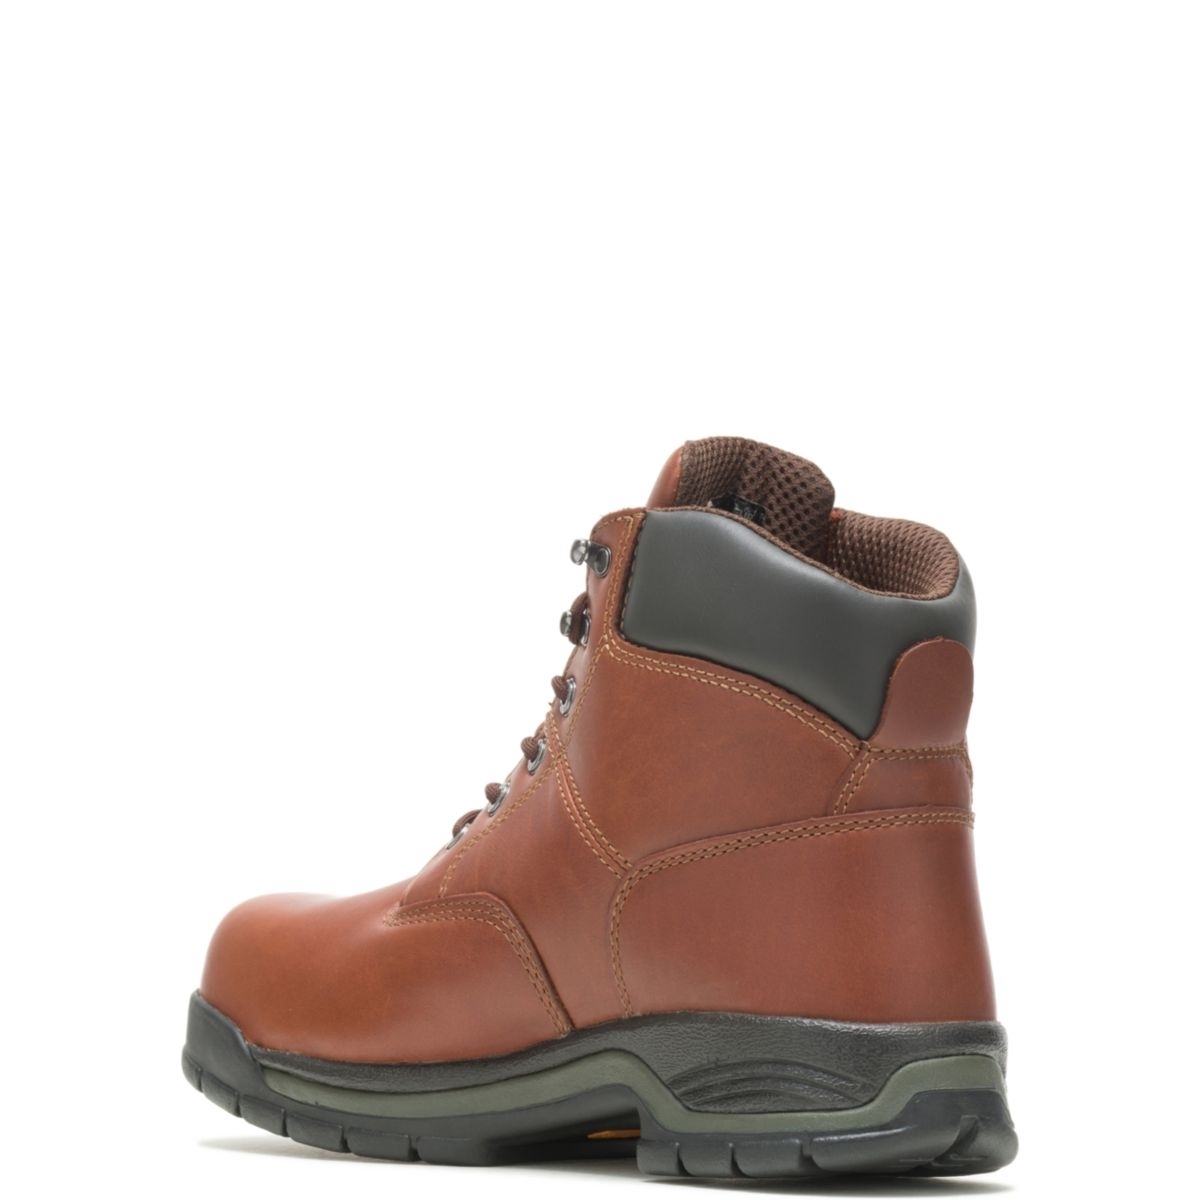 WOLVERINE Men's Harrison 6 Lace-Up SoftToe Work Boot Brown - W04906 Varies BROWN - BROWN, 10.5